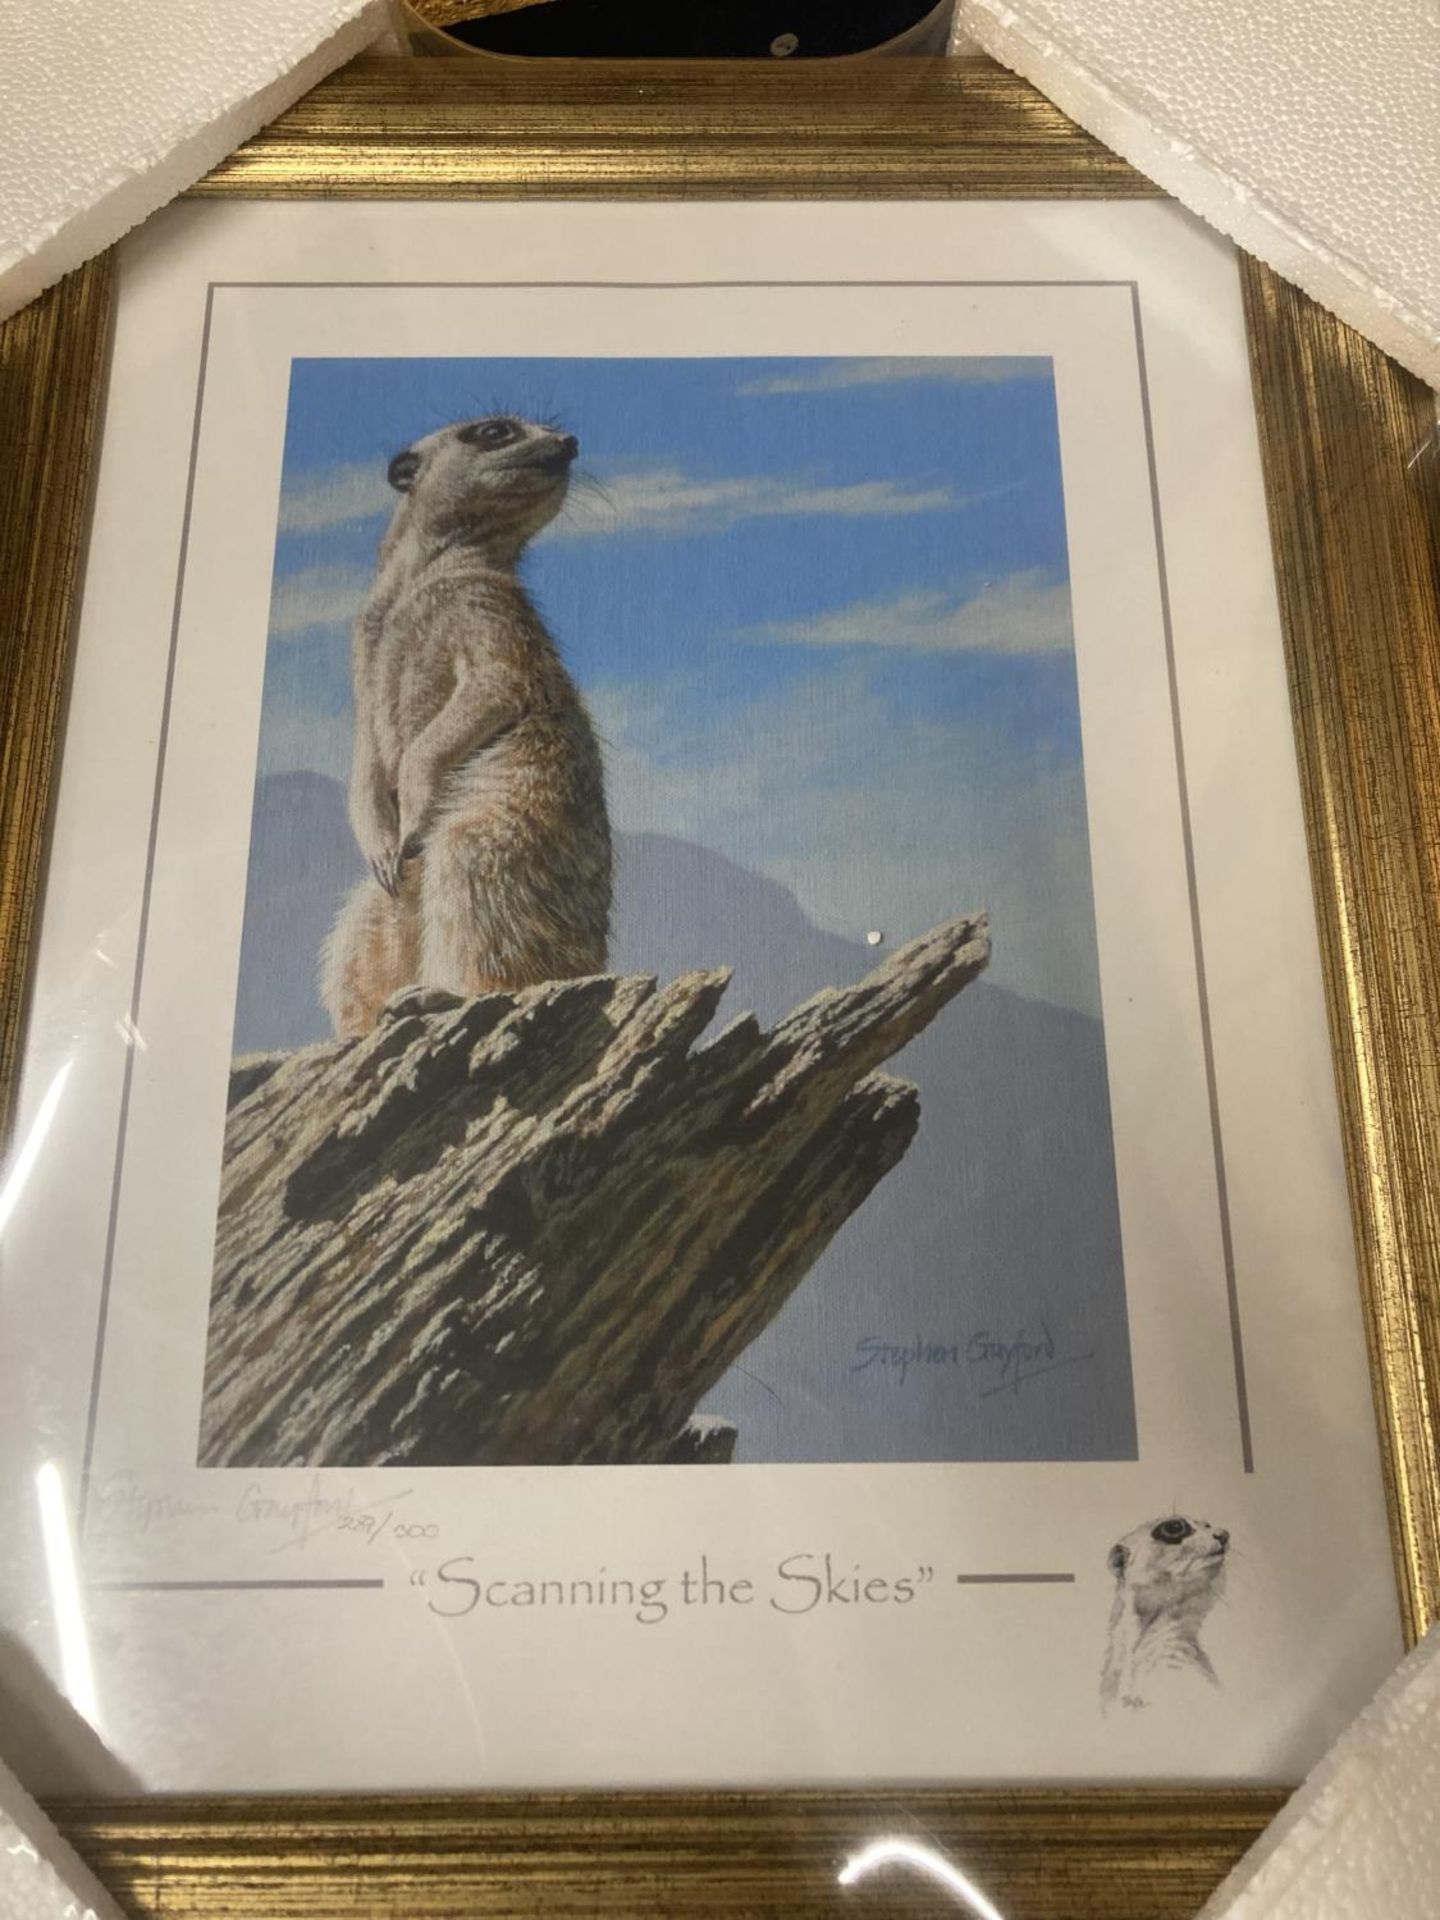 A FRAMED LIMITED EDITION PRINT OF A MEERKAT - 'SCANNING THE SKIES', 287/300 SIGNED STEPHEN GAYFORD